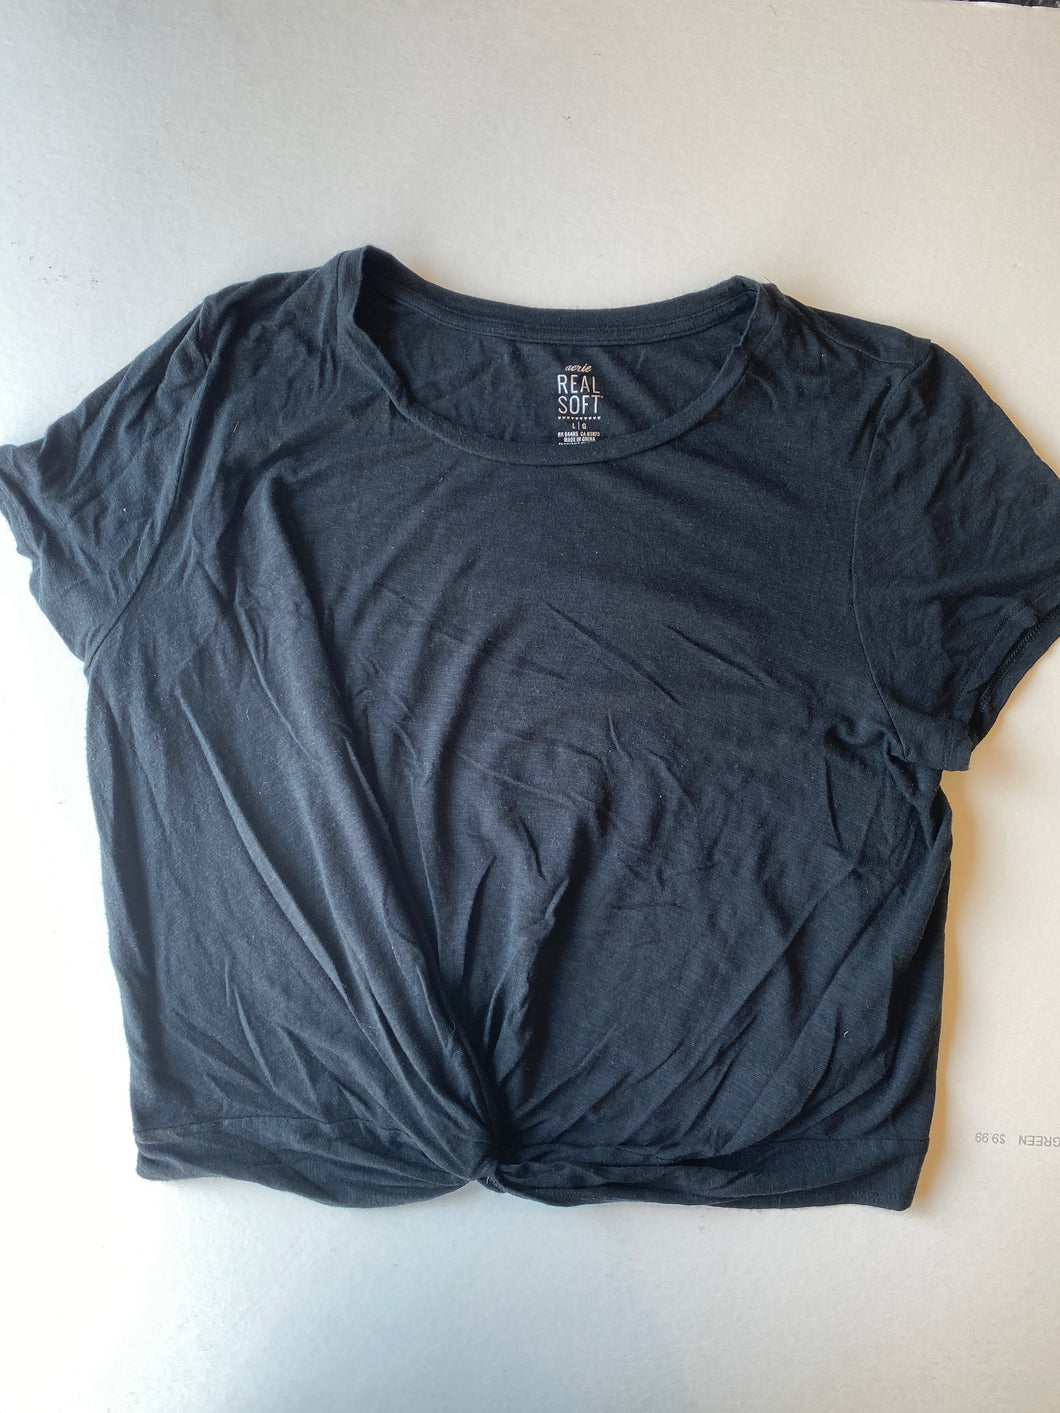 Aerie T-Shirt Size Large